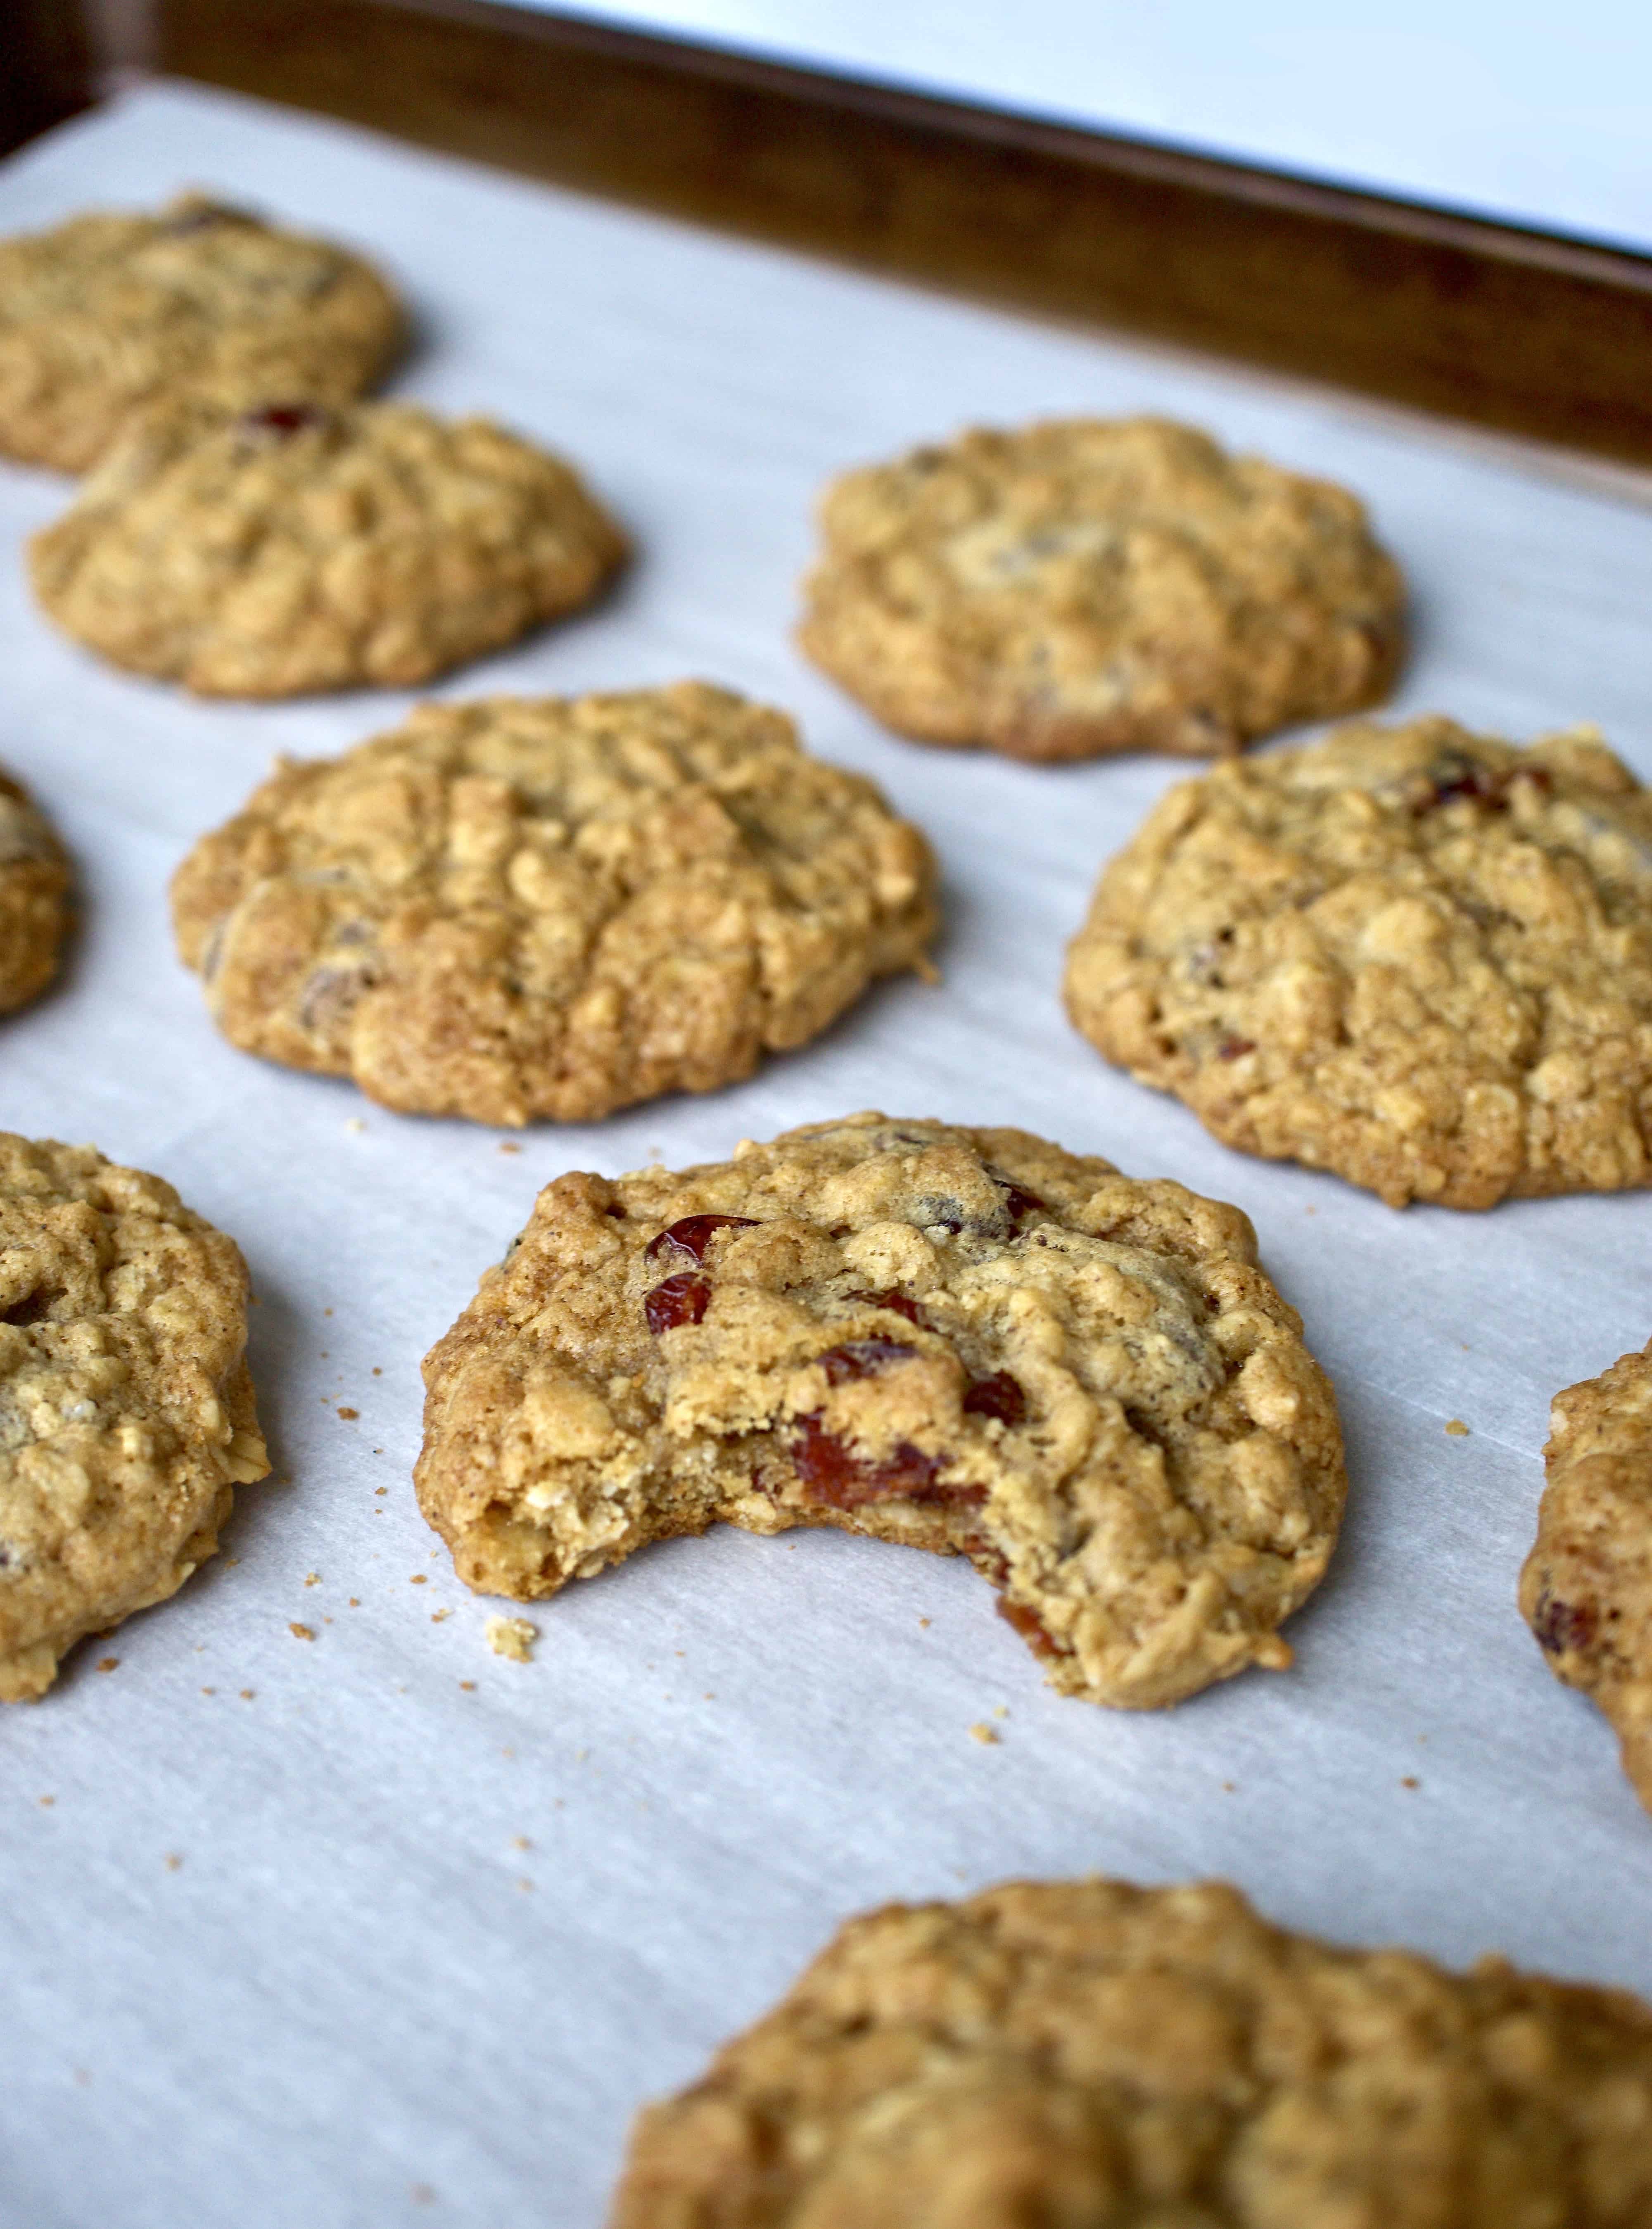 Oatmeal cranberry chocolate chip cookies on parchment paper